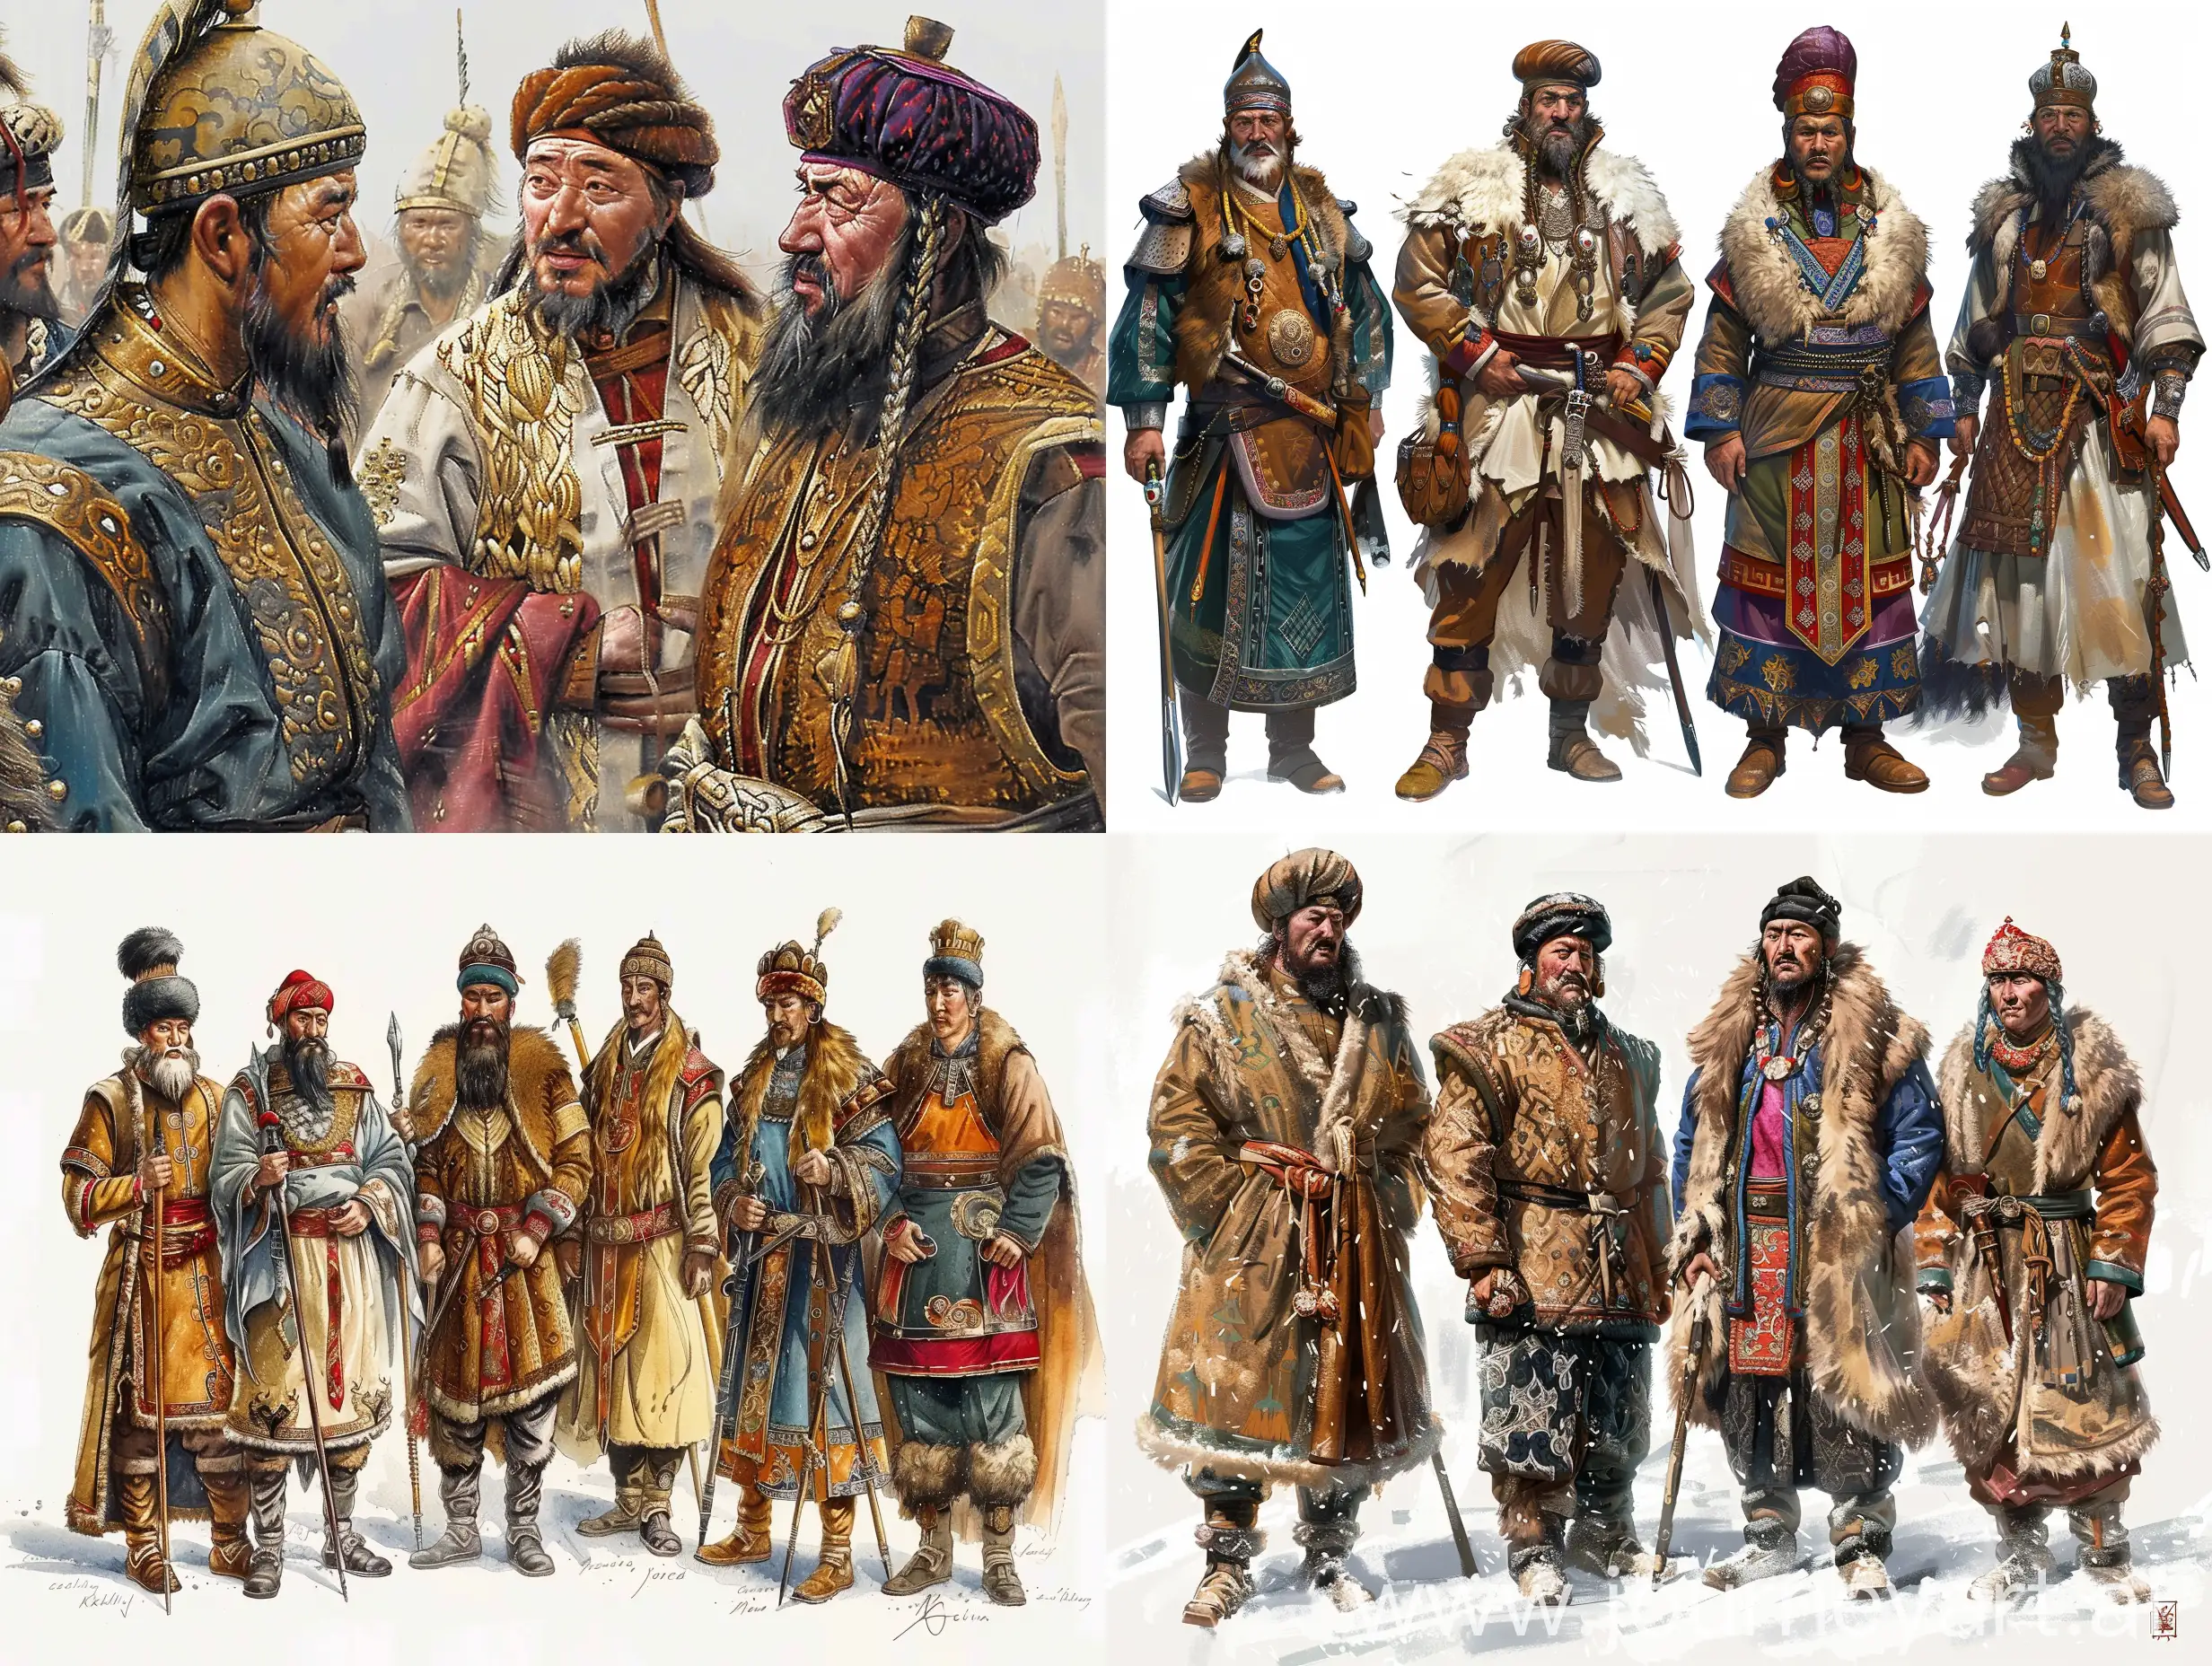 Mongolian-Yoruks-Diverse-Tribes-and-Lineages-in-High-Quality